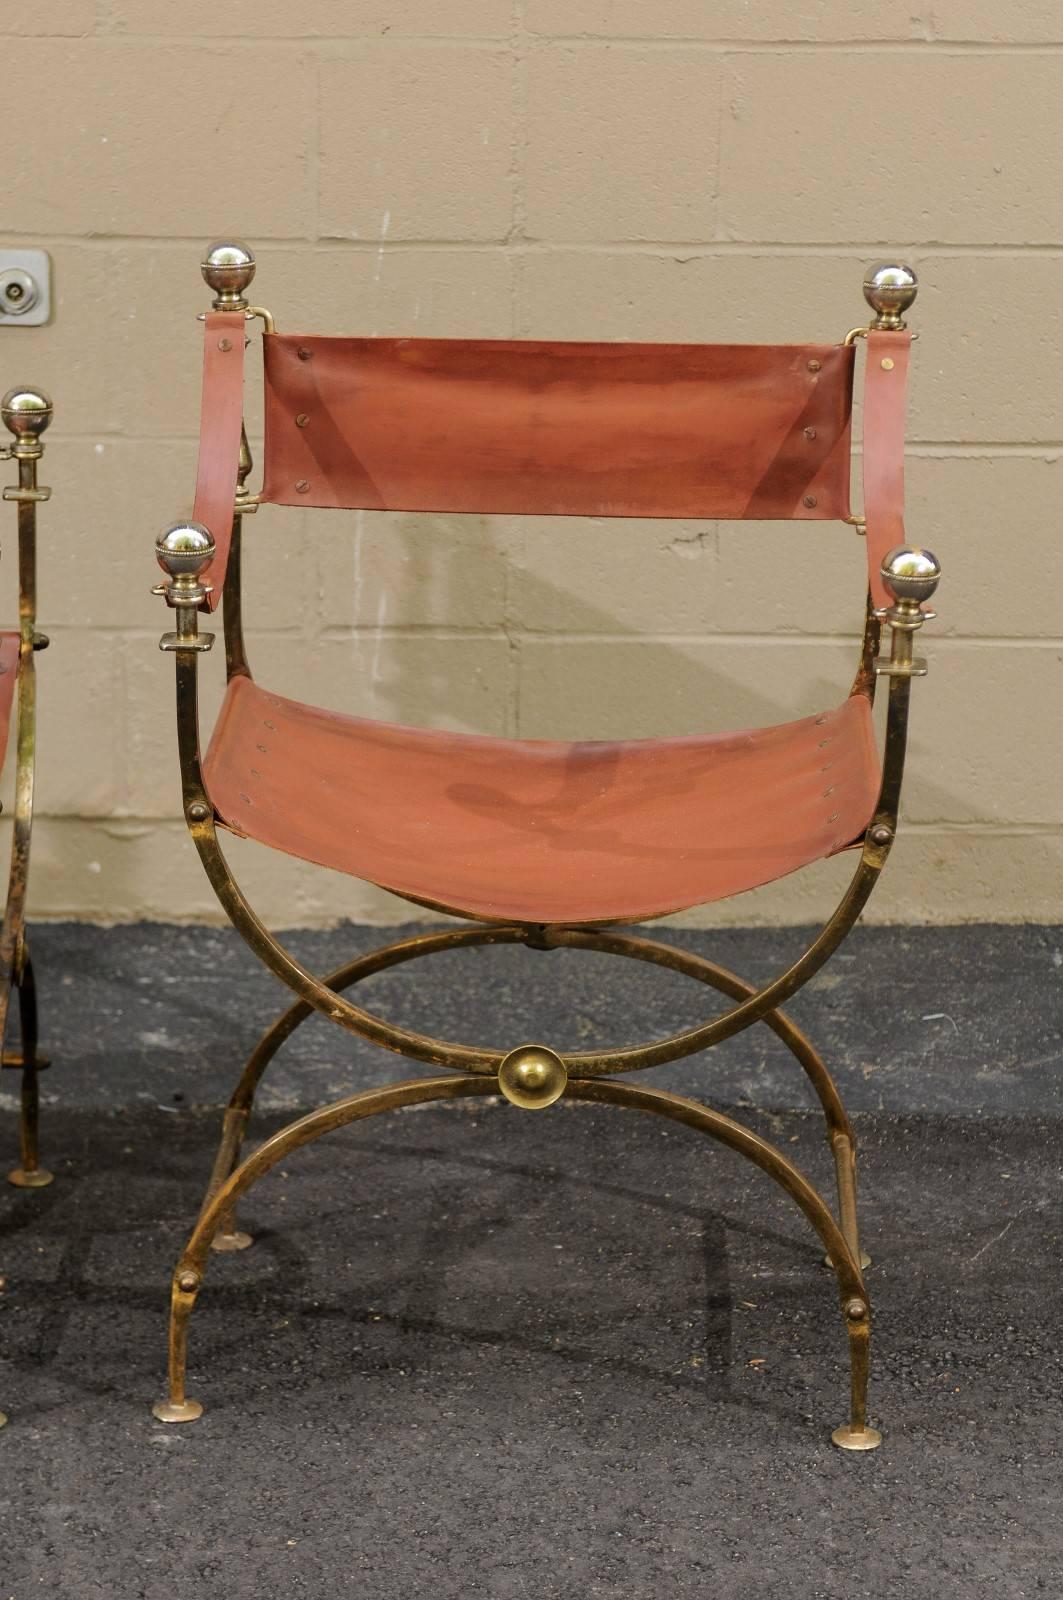 A French Regency Campaign Curule (also known as Savonarola) chair from the mid-20th century with leather back, arms, seat and a brass body on a half-moon X-shaped base. This elegant leather and brass Curule chair caught our eye. Heavy and